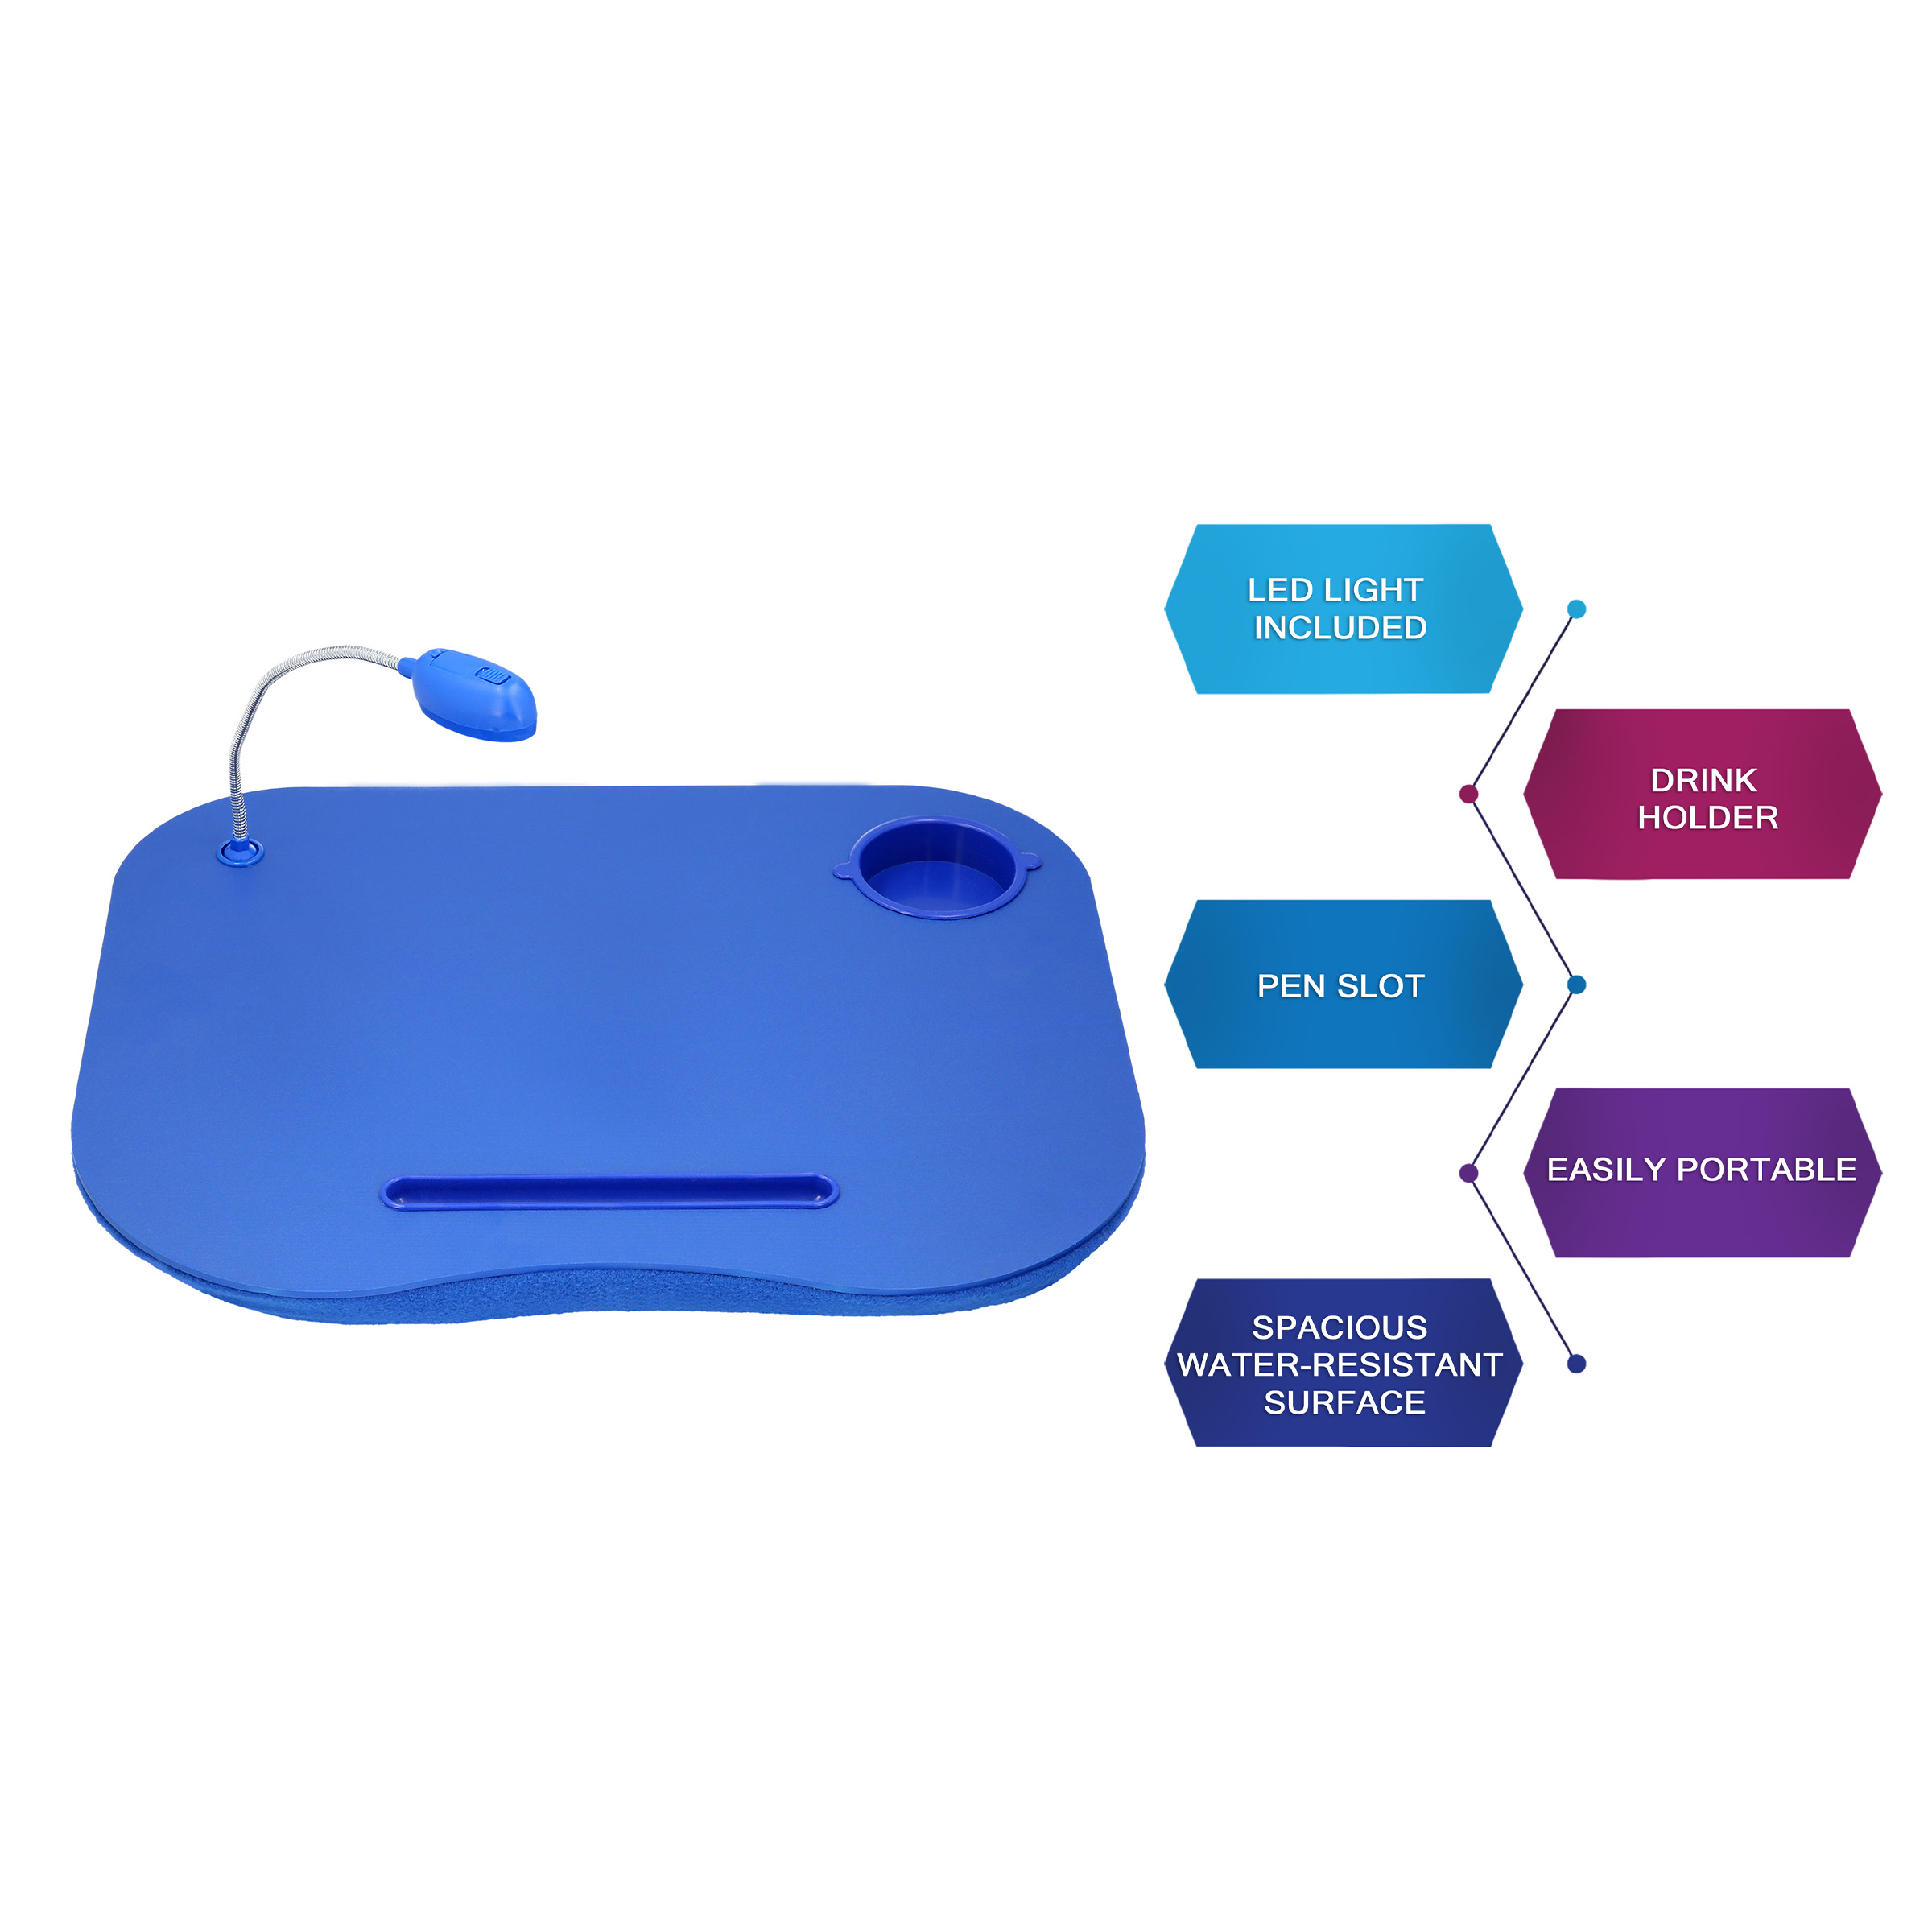 Lavish Home Cushioned Laptop Lap Desk with LED Light and Cup Holder (Blue) - image 2 of 4